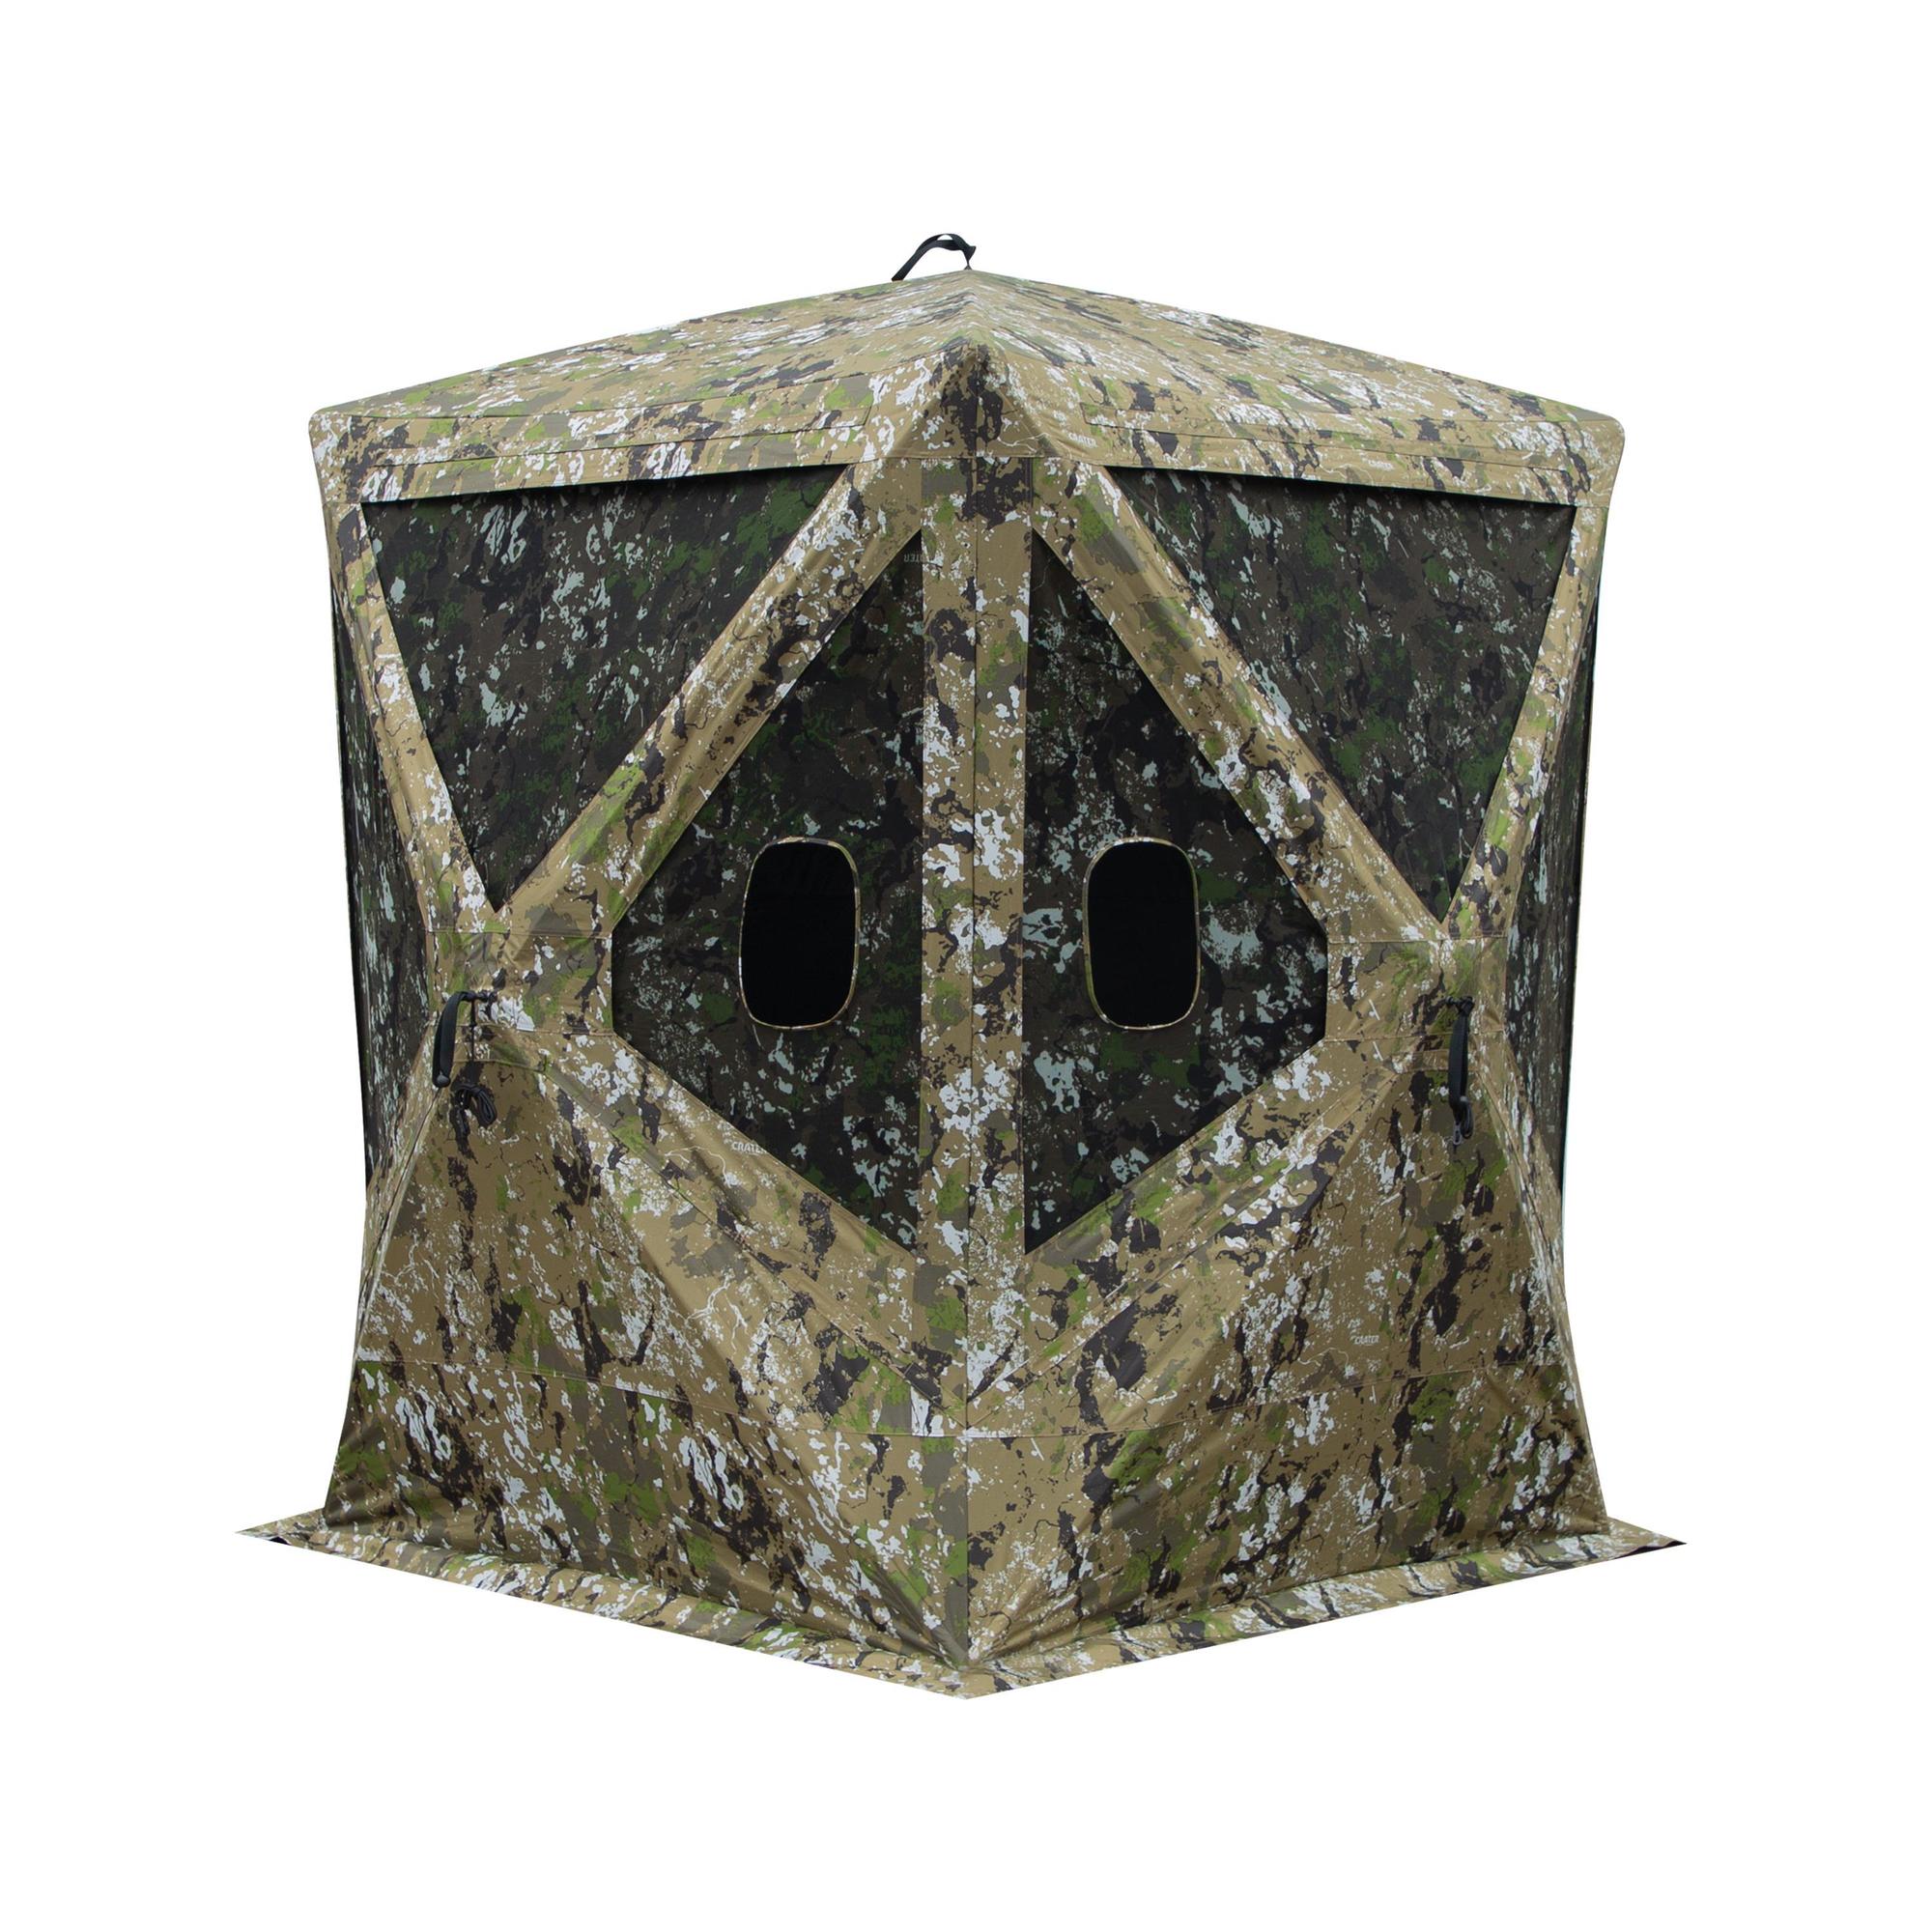 Barronett Blinds, Big Mike Hunting Blind, Tall Hub Blind, 2-Person, Color Camouflage, Material Polyester, Model BM300CT